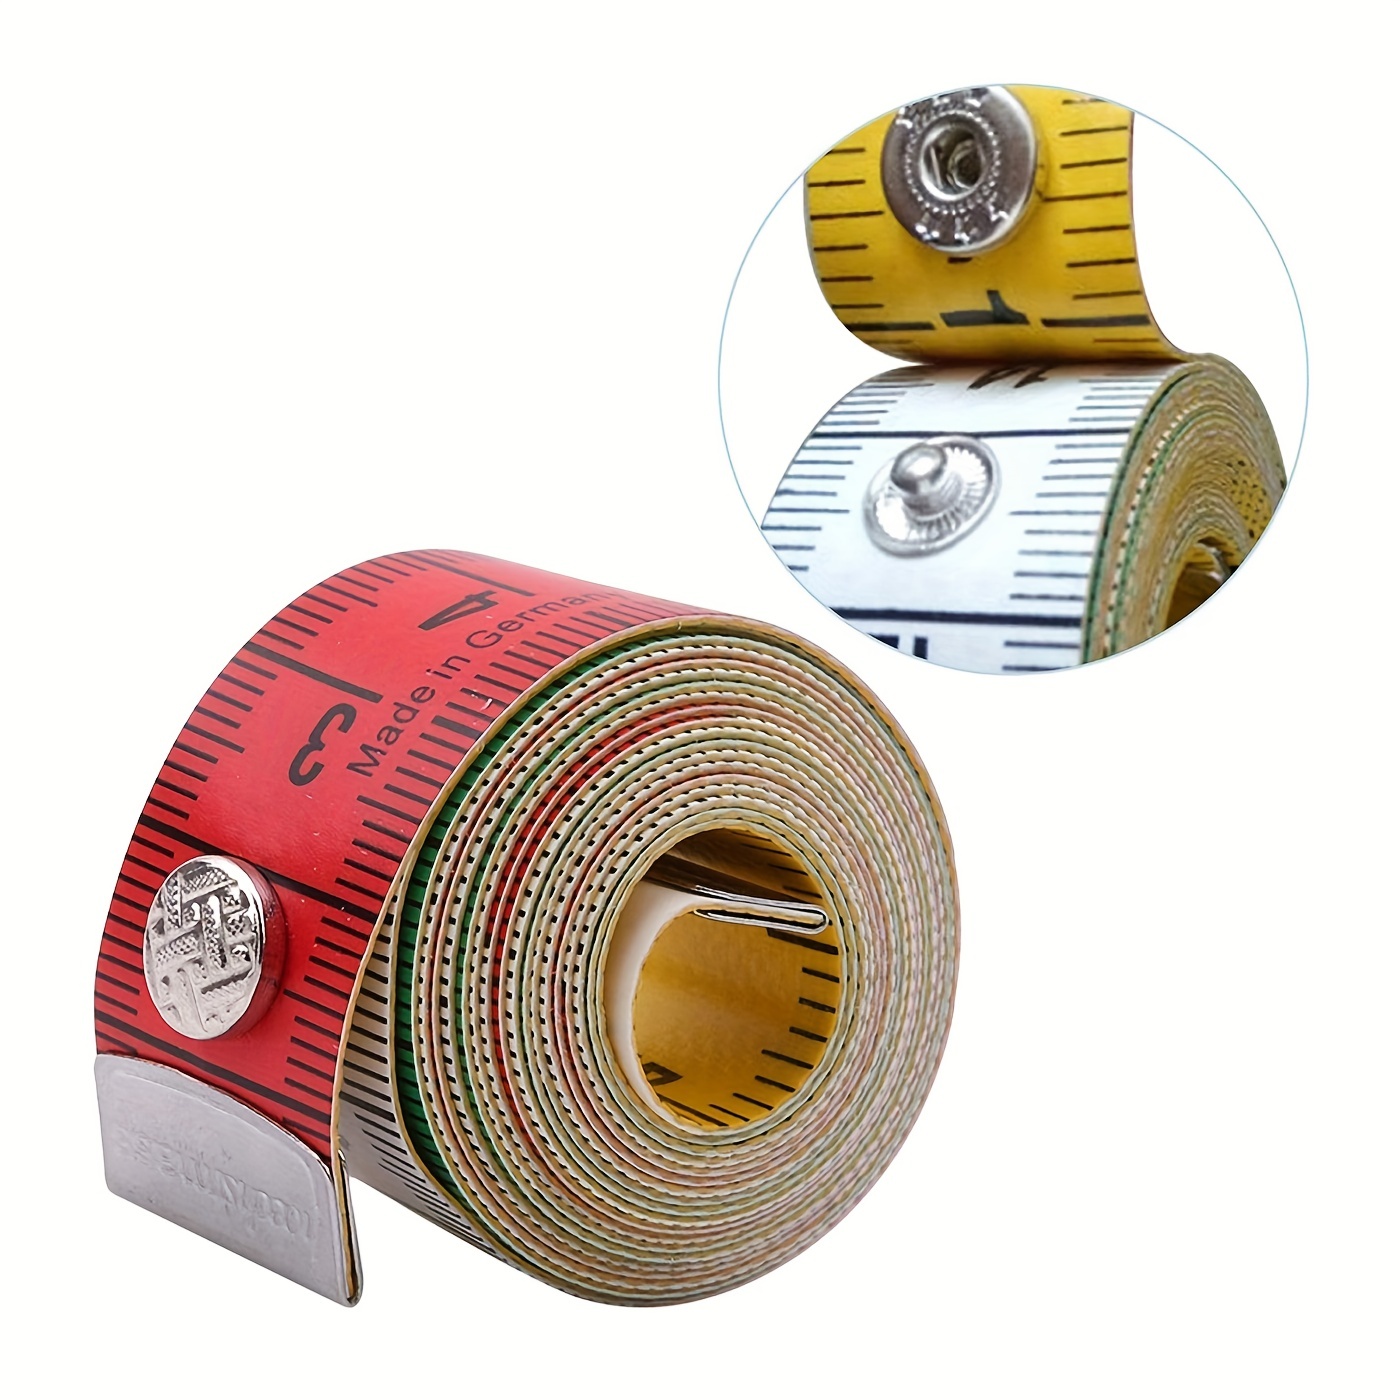 2pcs/pack, Tape Measure, Soft Tape Measure, Sewing Tailor Cloth Tape  Measure, 120 Inches/300 Centimeters (yellow) And 60 Inches/150 Centimeters  (white